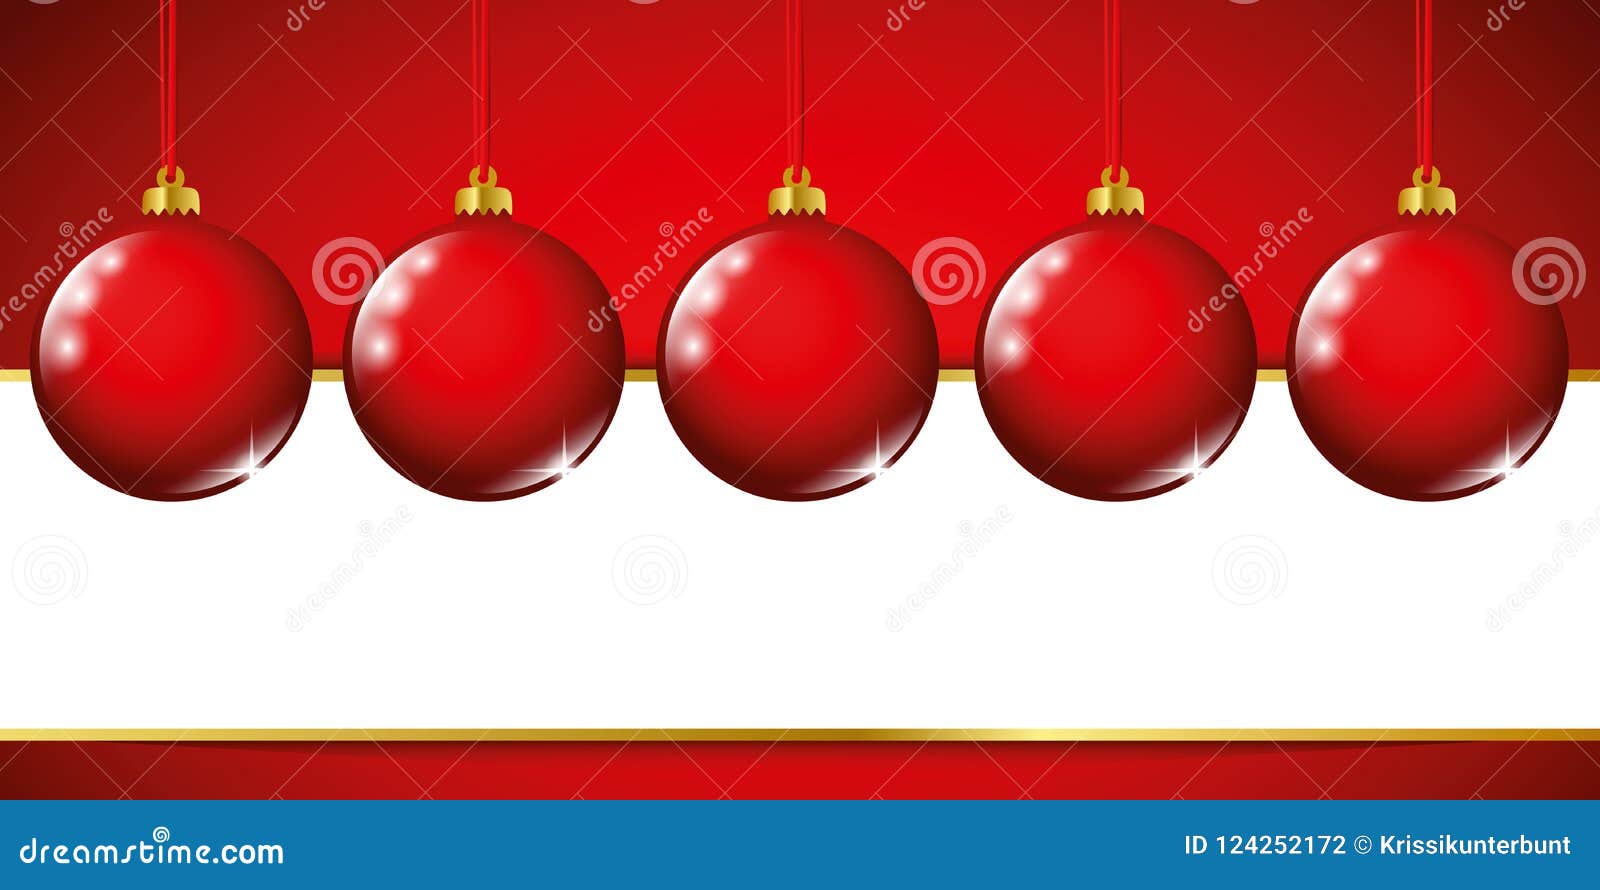 Banner Christmas Bauble Red Colored Stock Vector - Illustration of ...